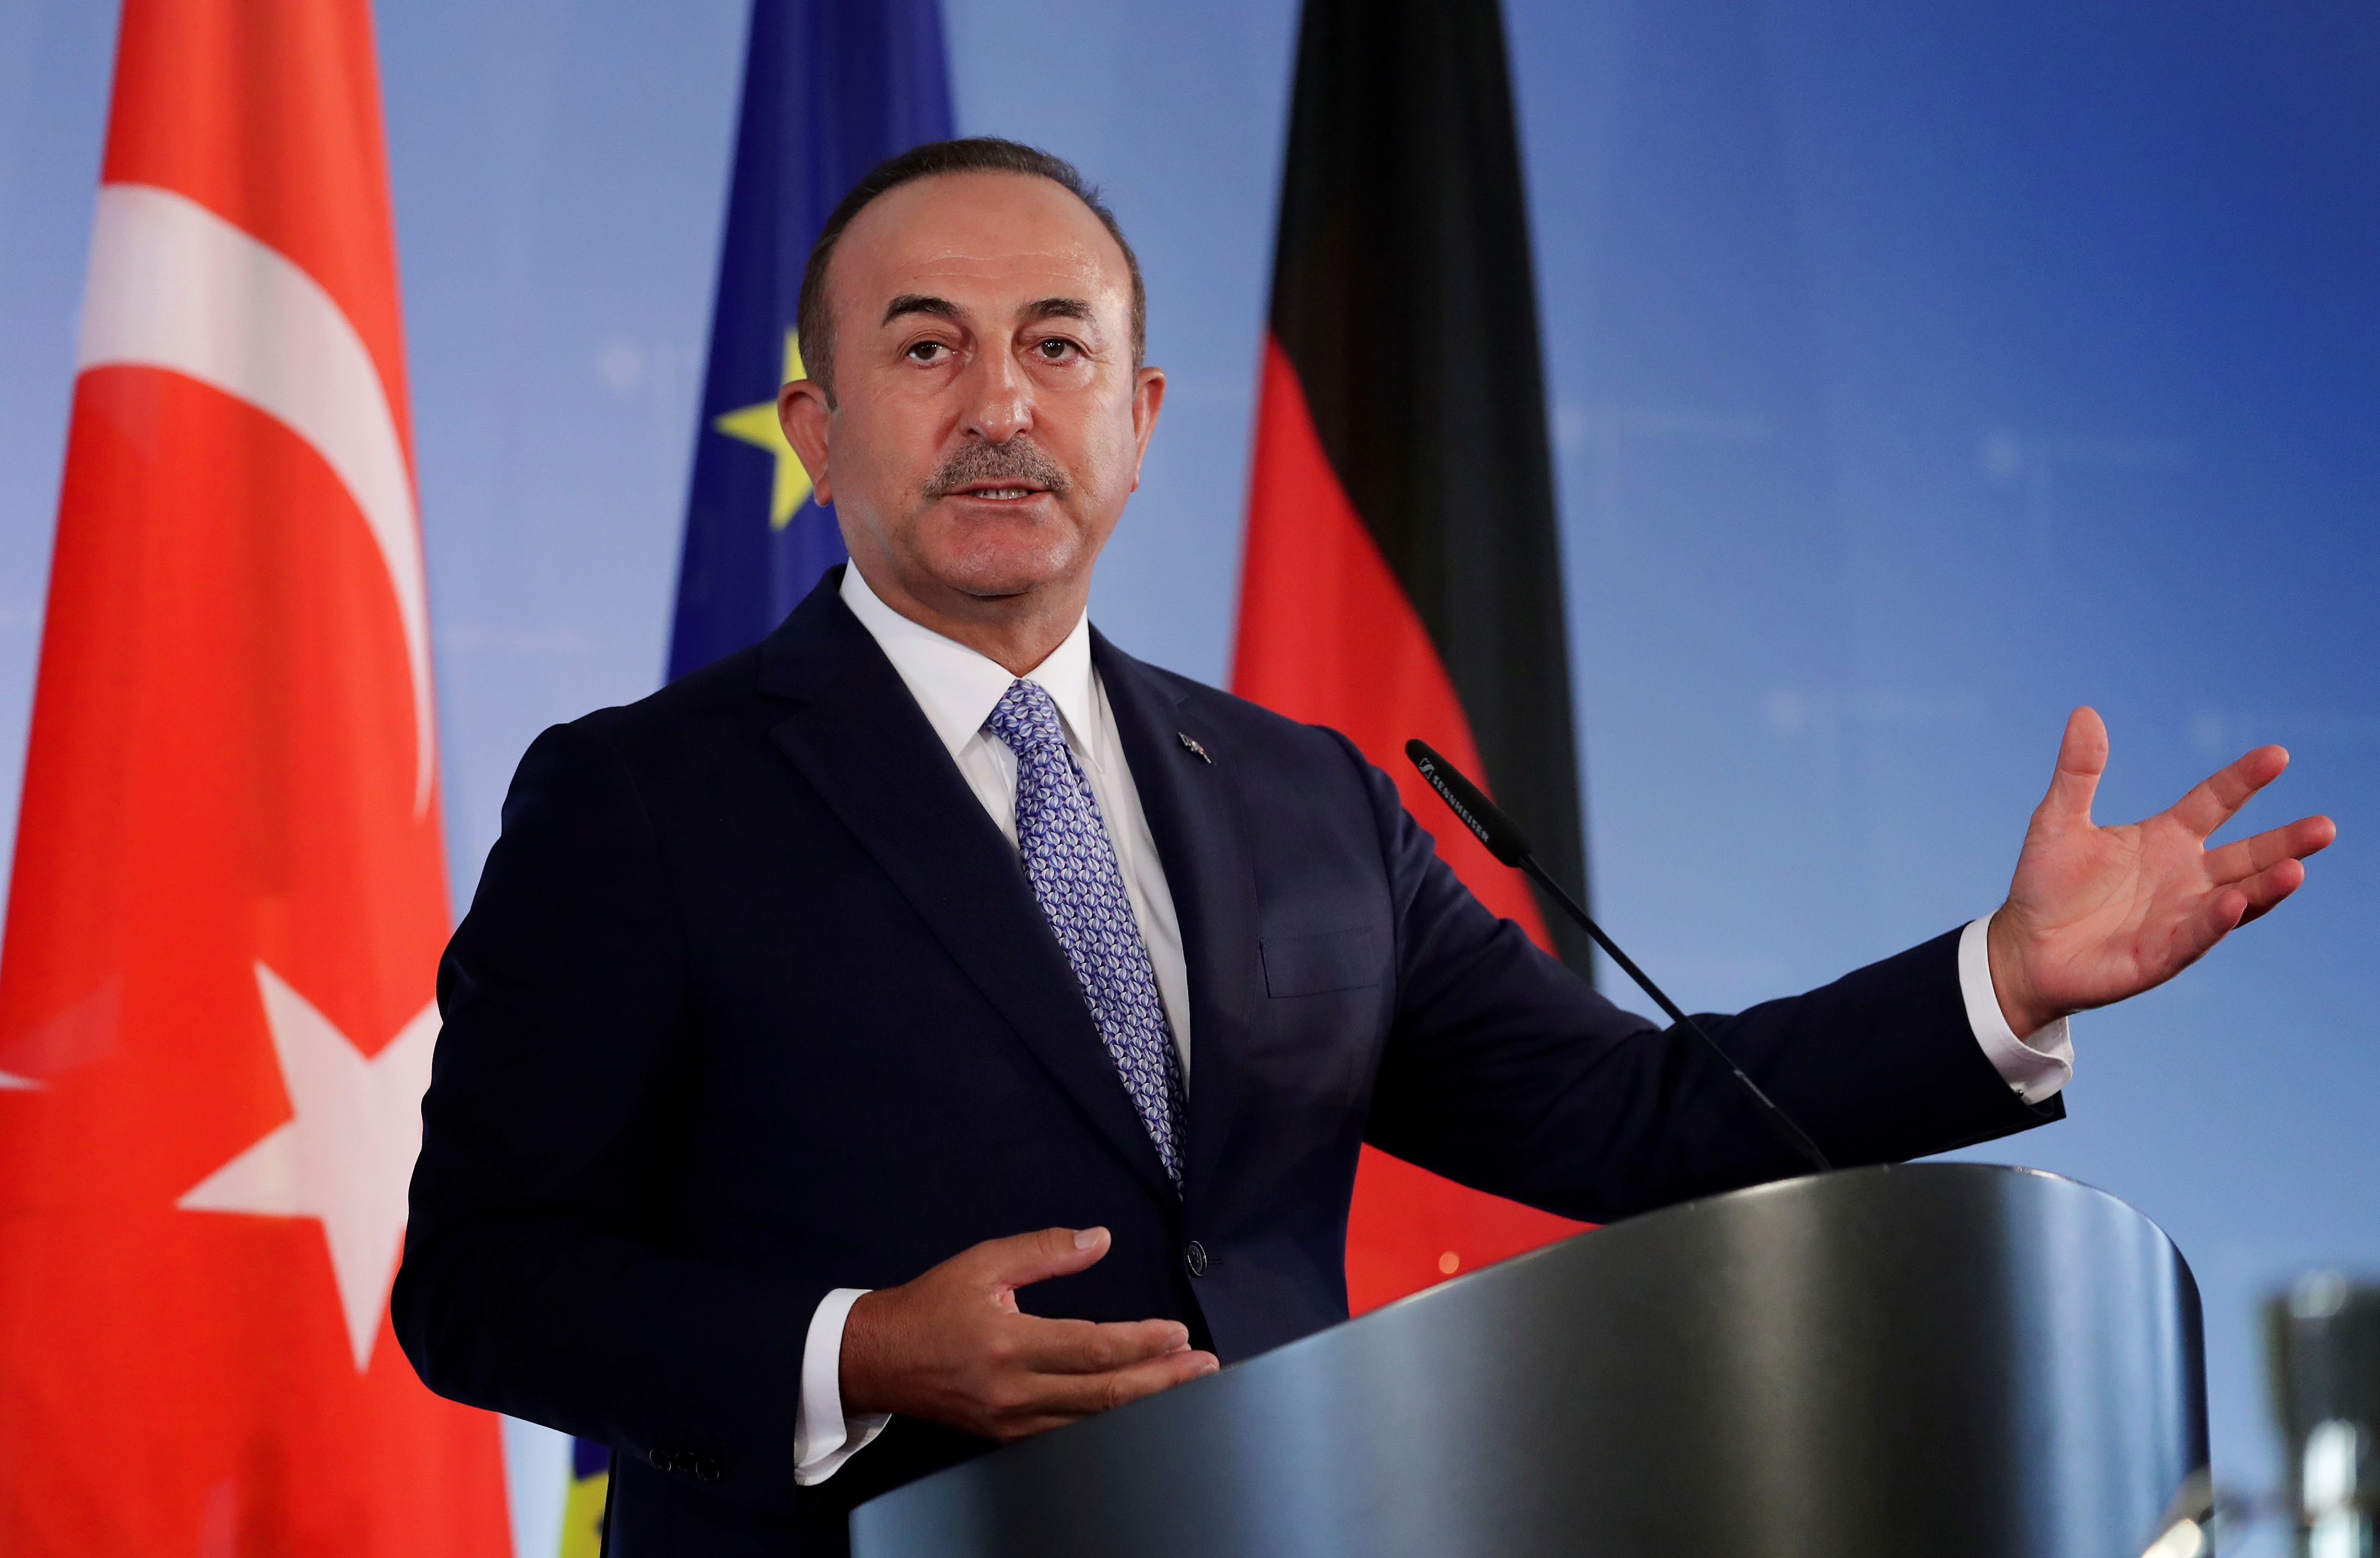 German Foreign Minister Heiko Maas and Turkish Foreign Minister Mevlut Cavusoglu address the media during a joint news conference after a meeting in Berlin